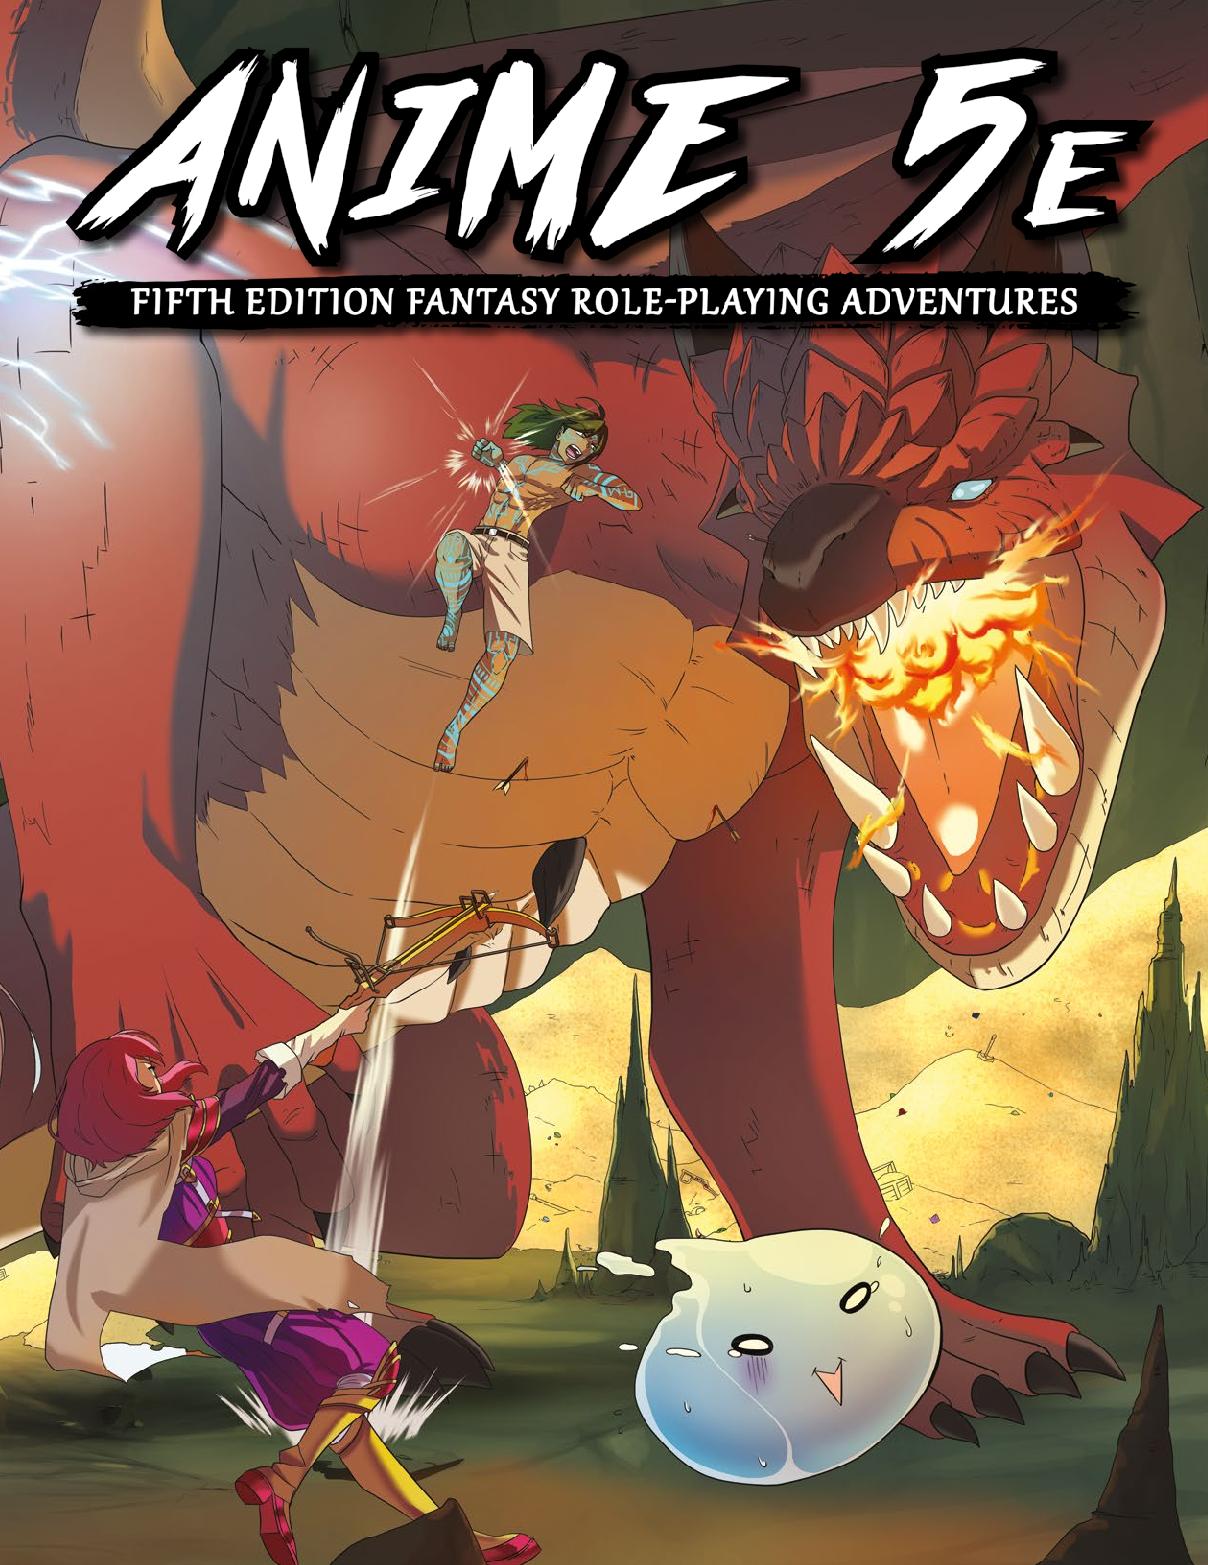 Top Anime 5e Pdf of all time The ultimate guide 